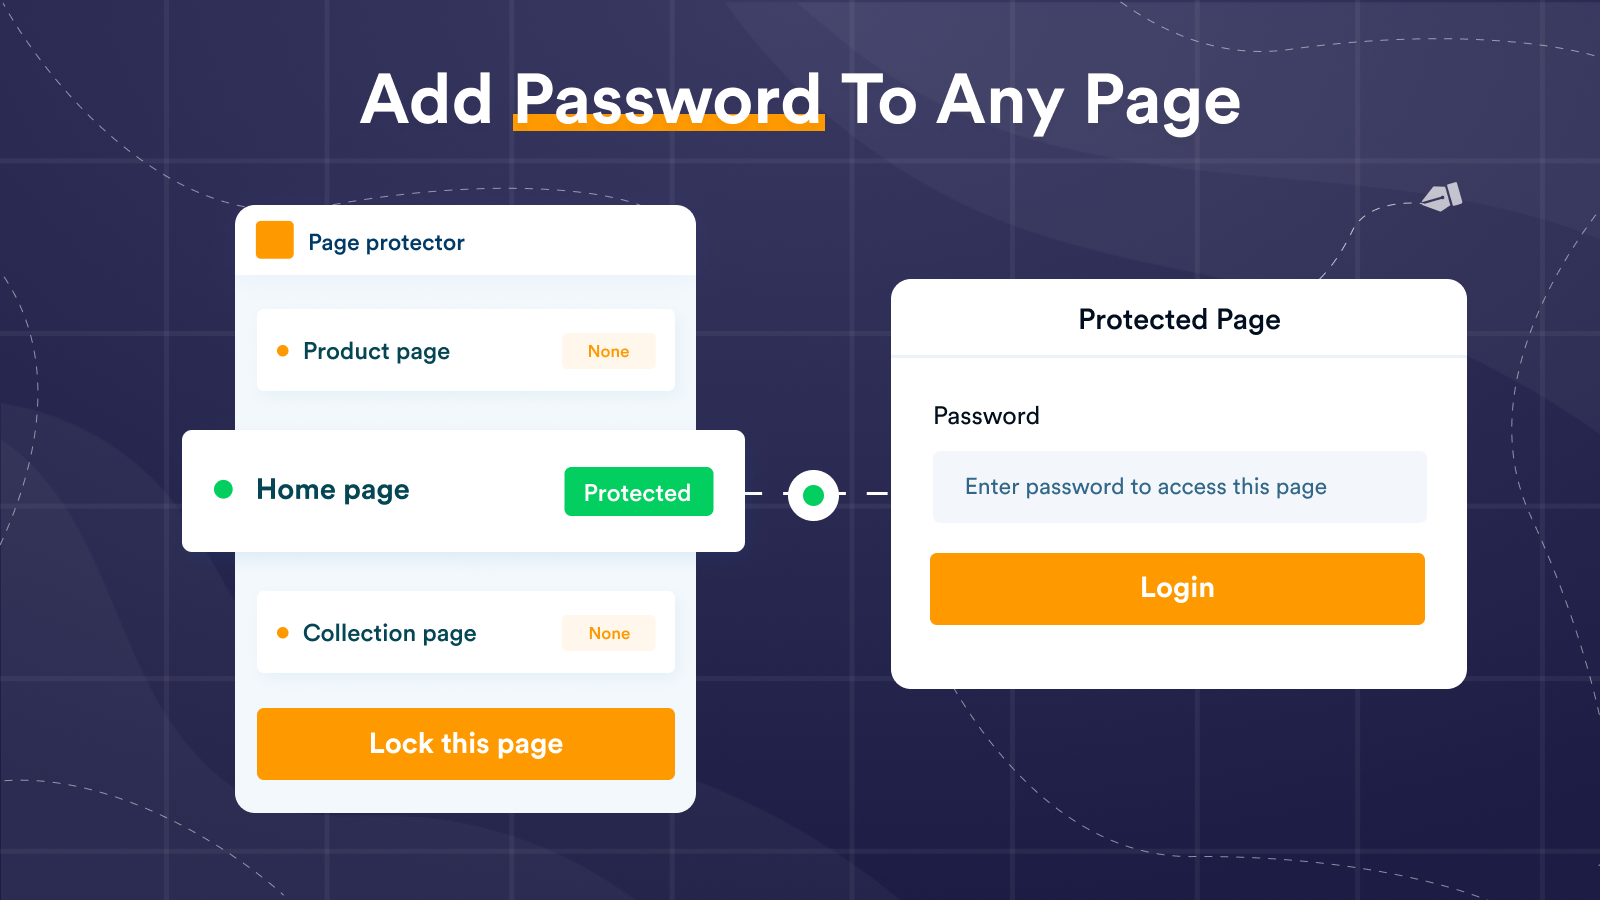 Add password to any page